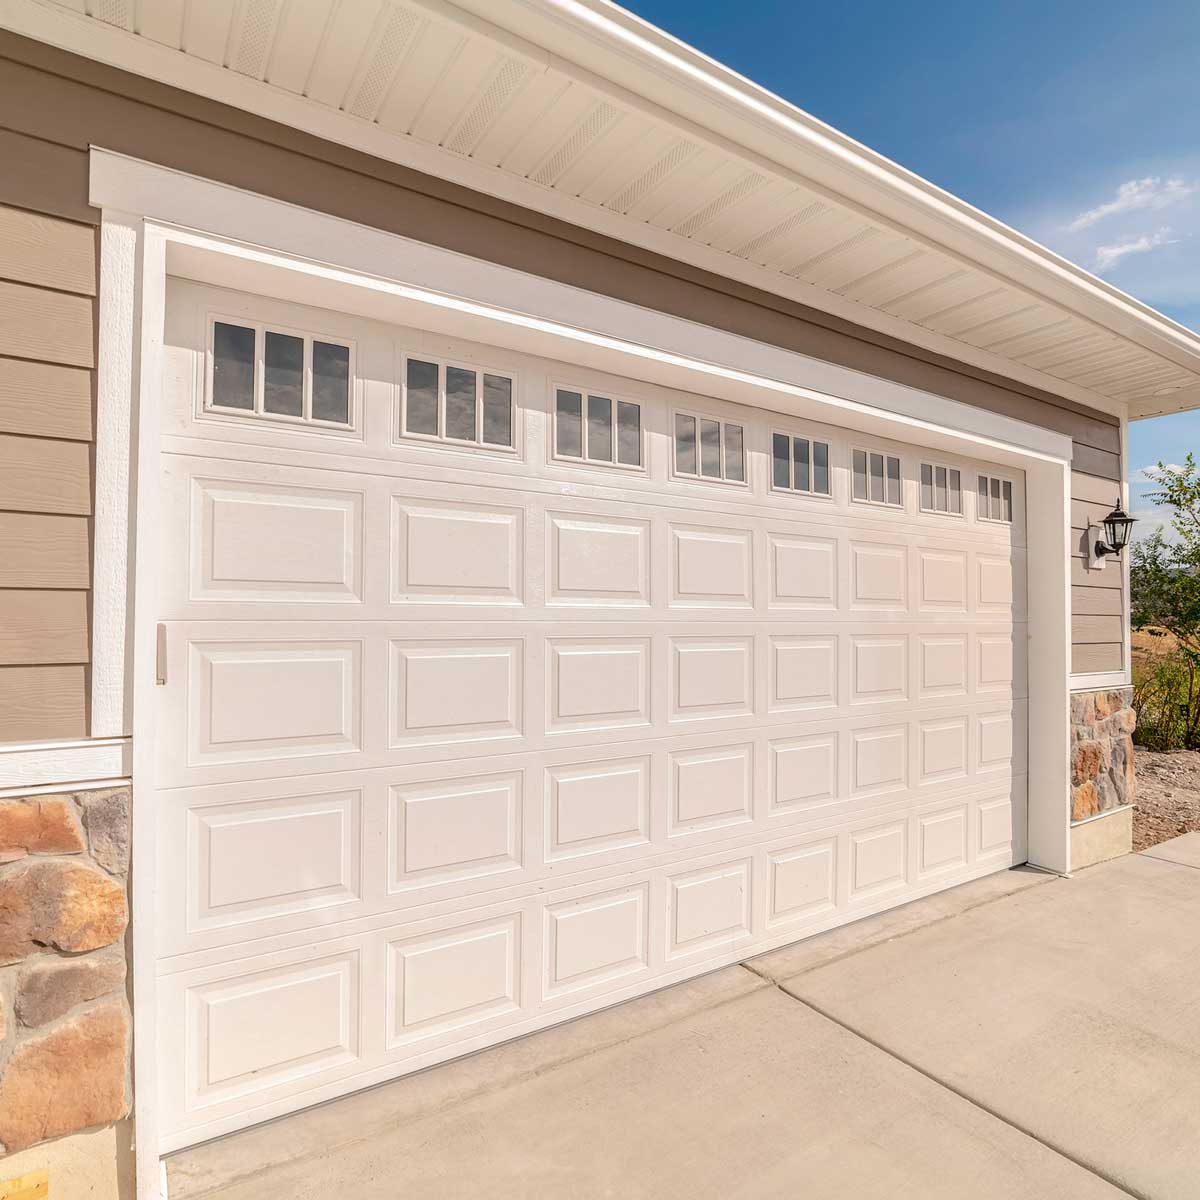 Converting A Garage Into Living Space, How Much Would It Cost To Move A Garage Door